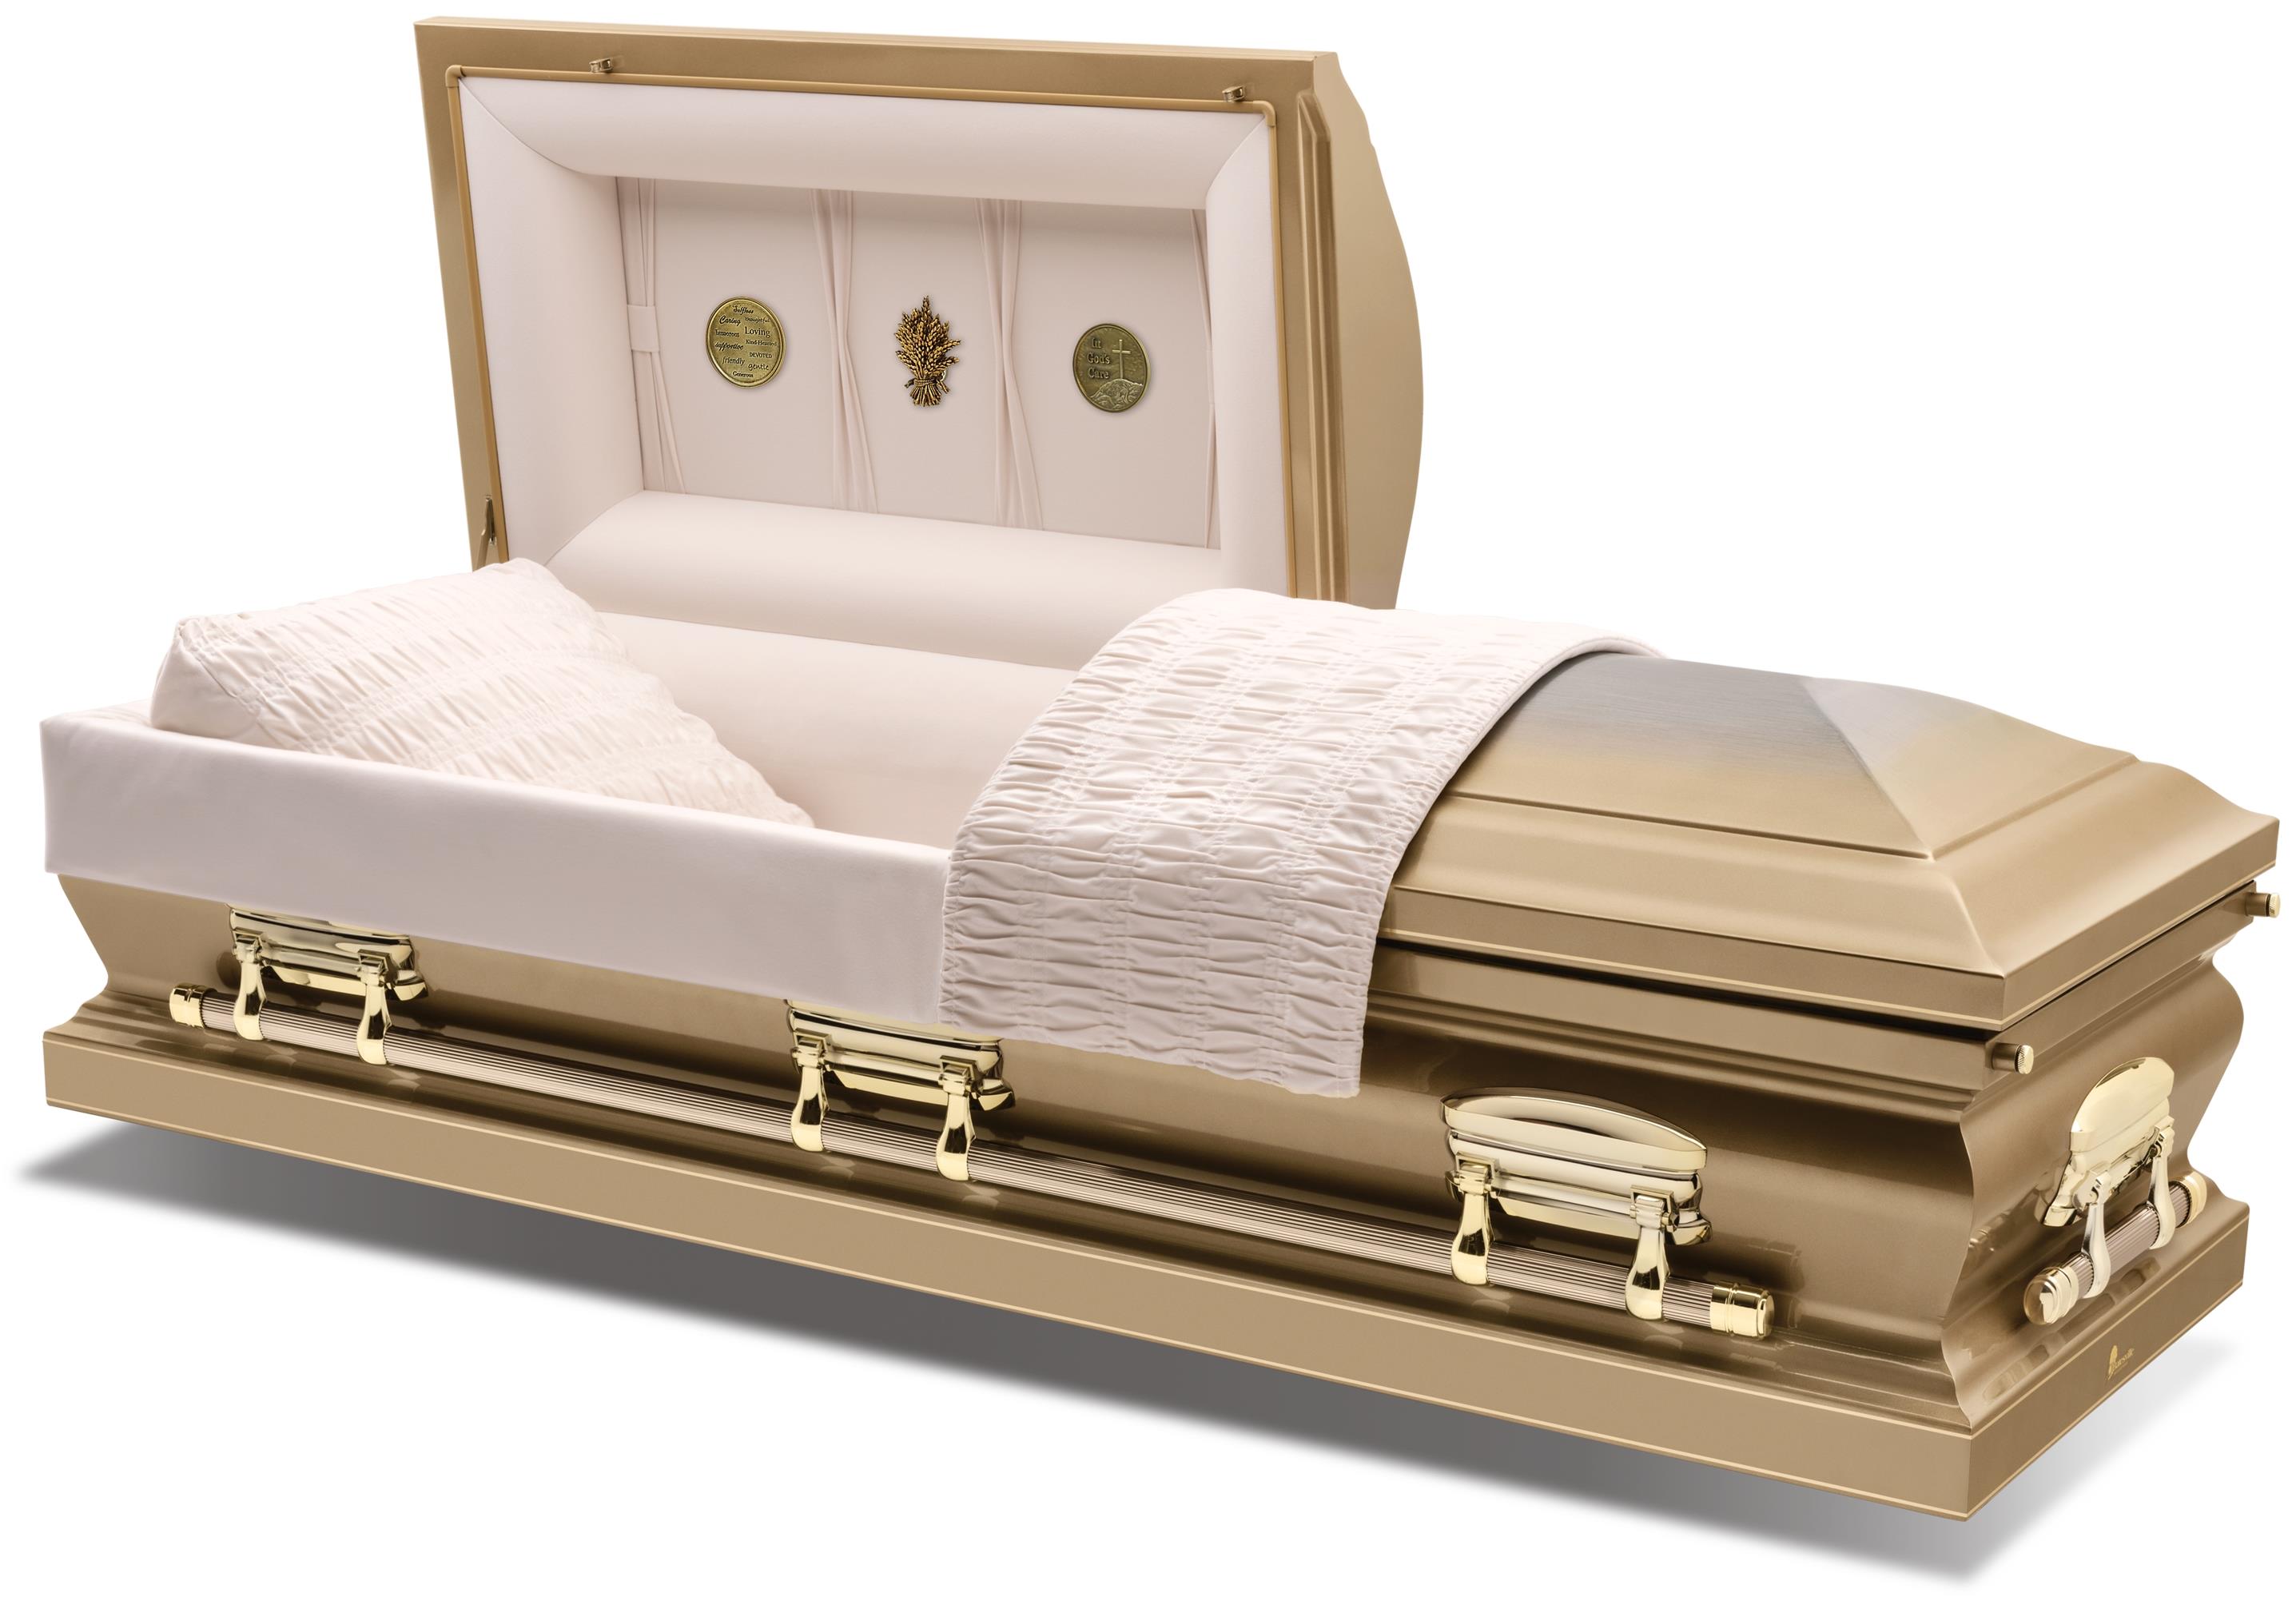 O61 Cashmere Lake Shore Funeral Home And Cremation Services Waco Texas 4512